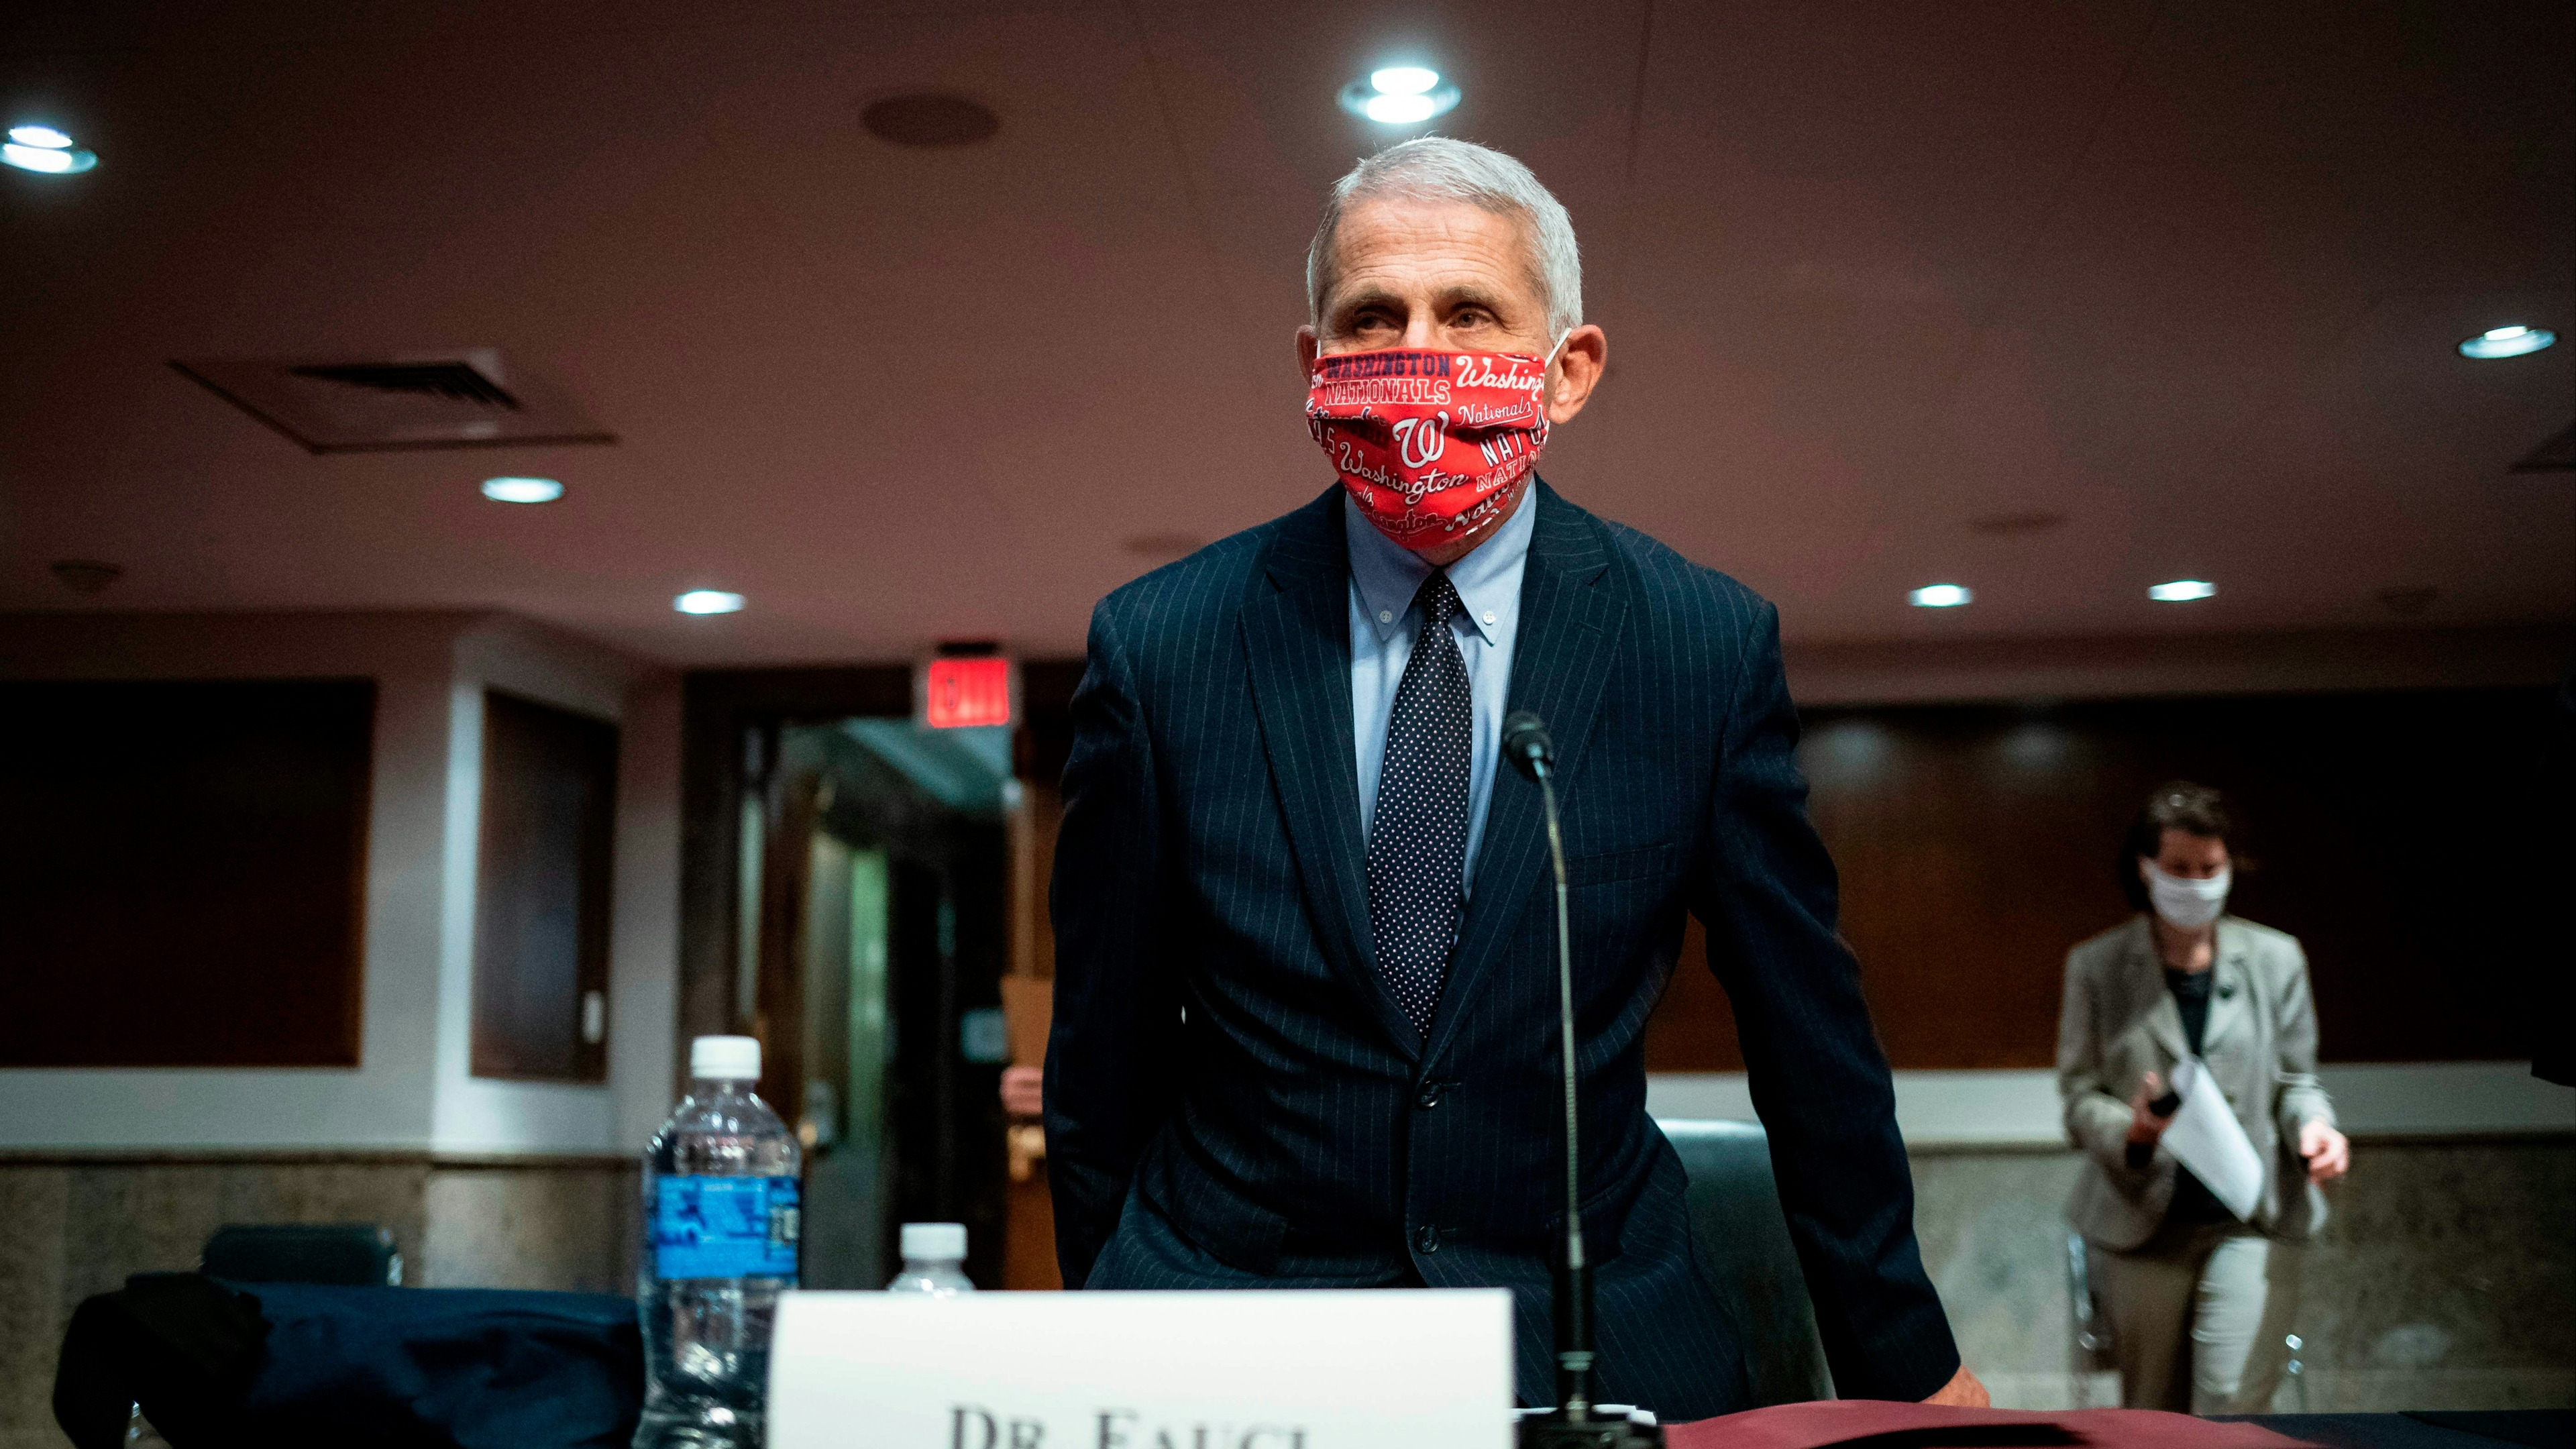 Anthony Fauci, director of the National Institute of Allergy and Infectious Diseases, at Senate hearing